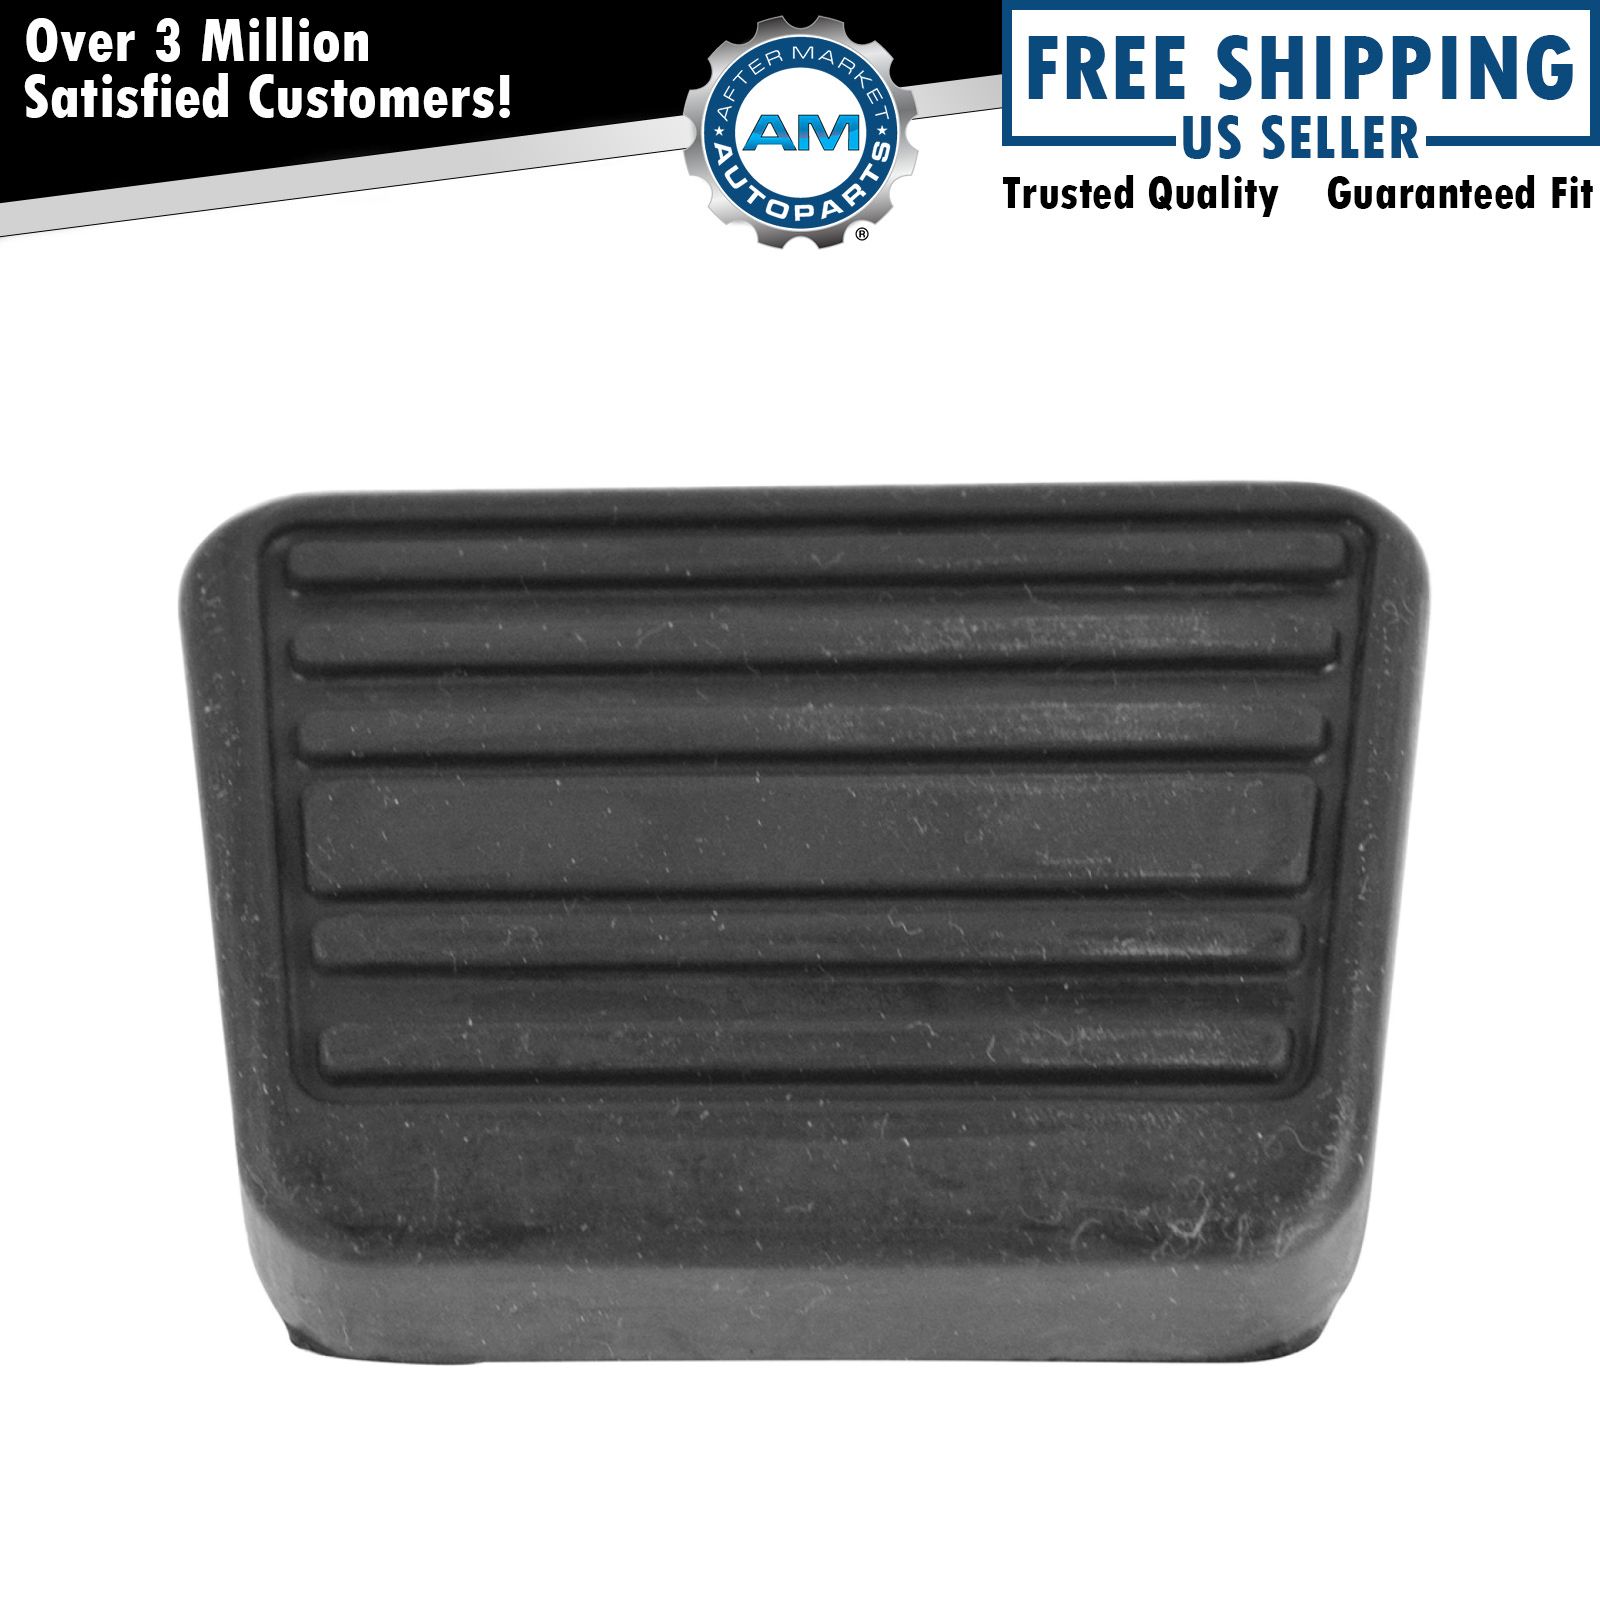 OEM Rubber Pedal Pad Brake or Clutch for Chevy Buick Olds Pontiac 15706041 New